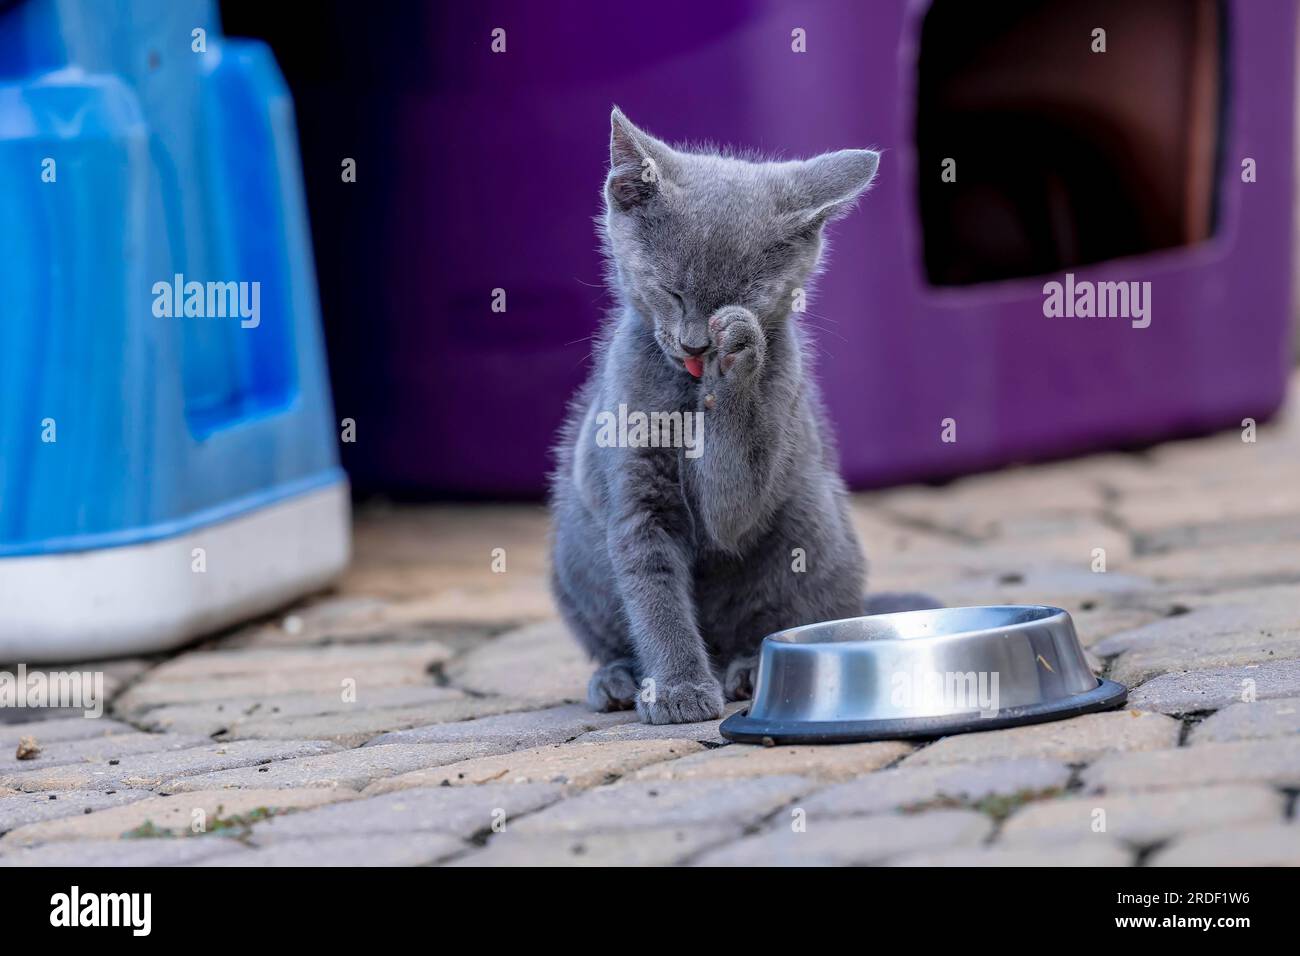 8 week old outside kittens eat their meals and clean themselves afterwards in an urban environment Stock Photo